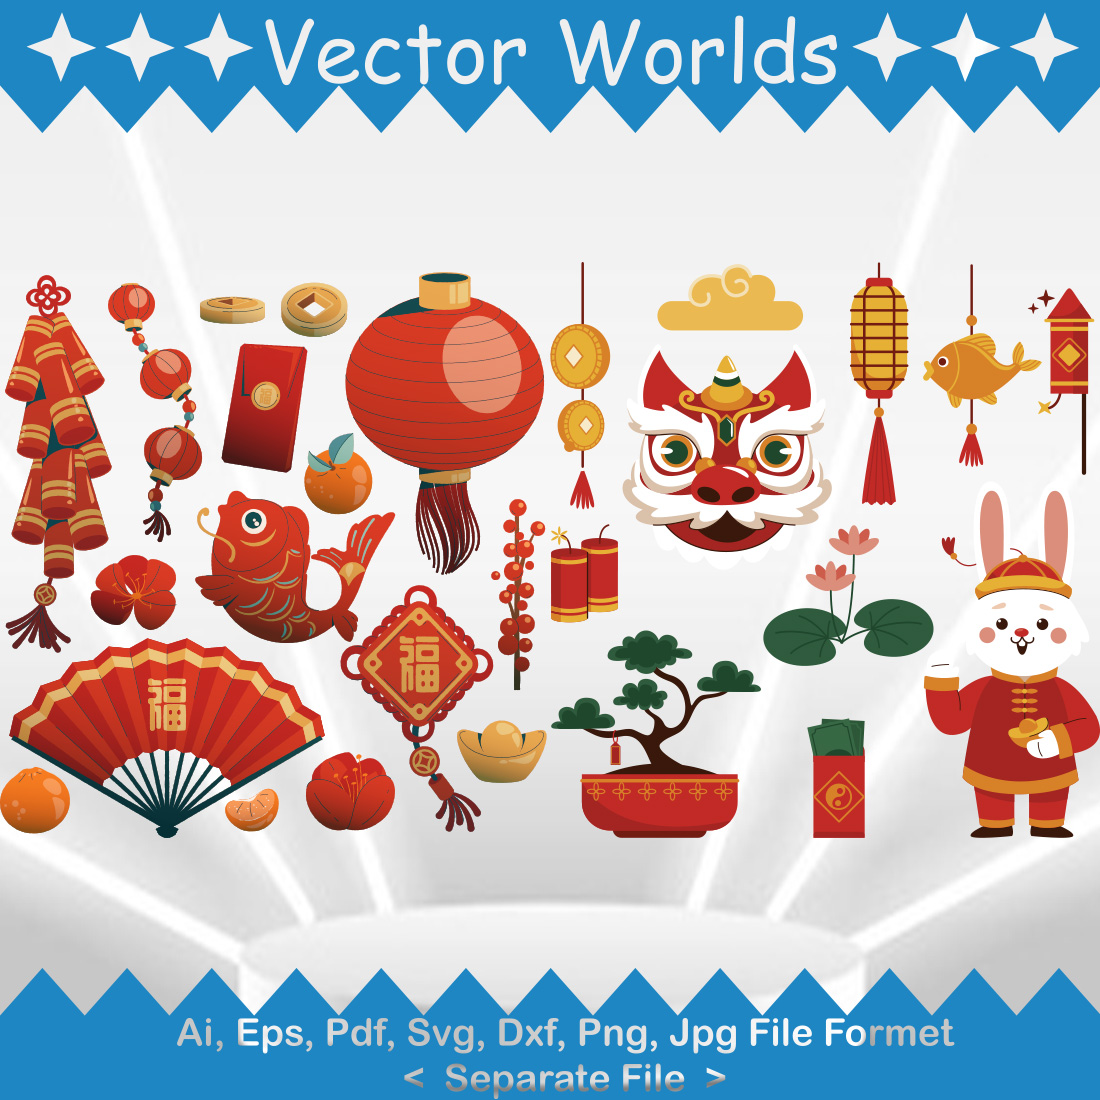 Lunar New Year SVG Vector Design cover image.